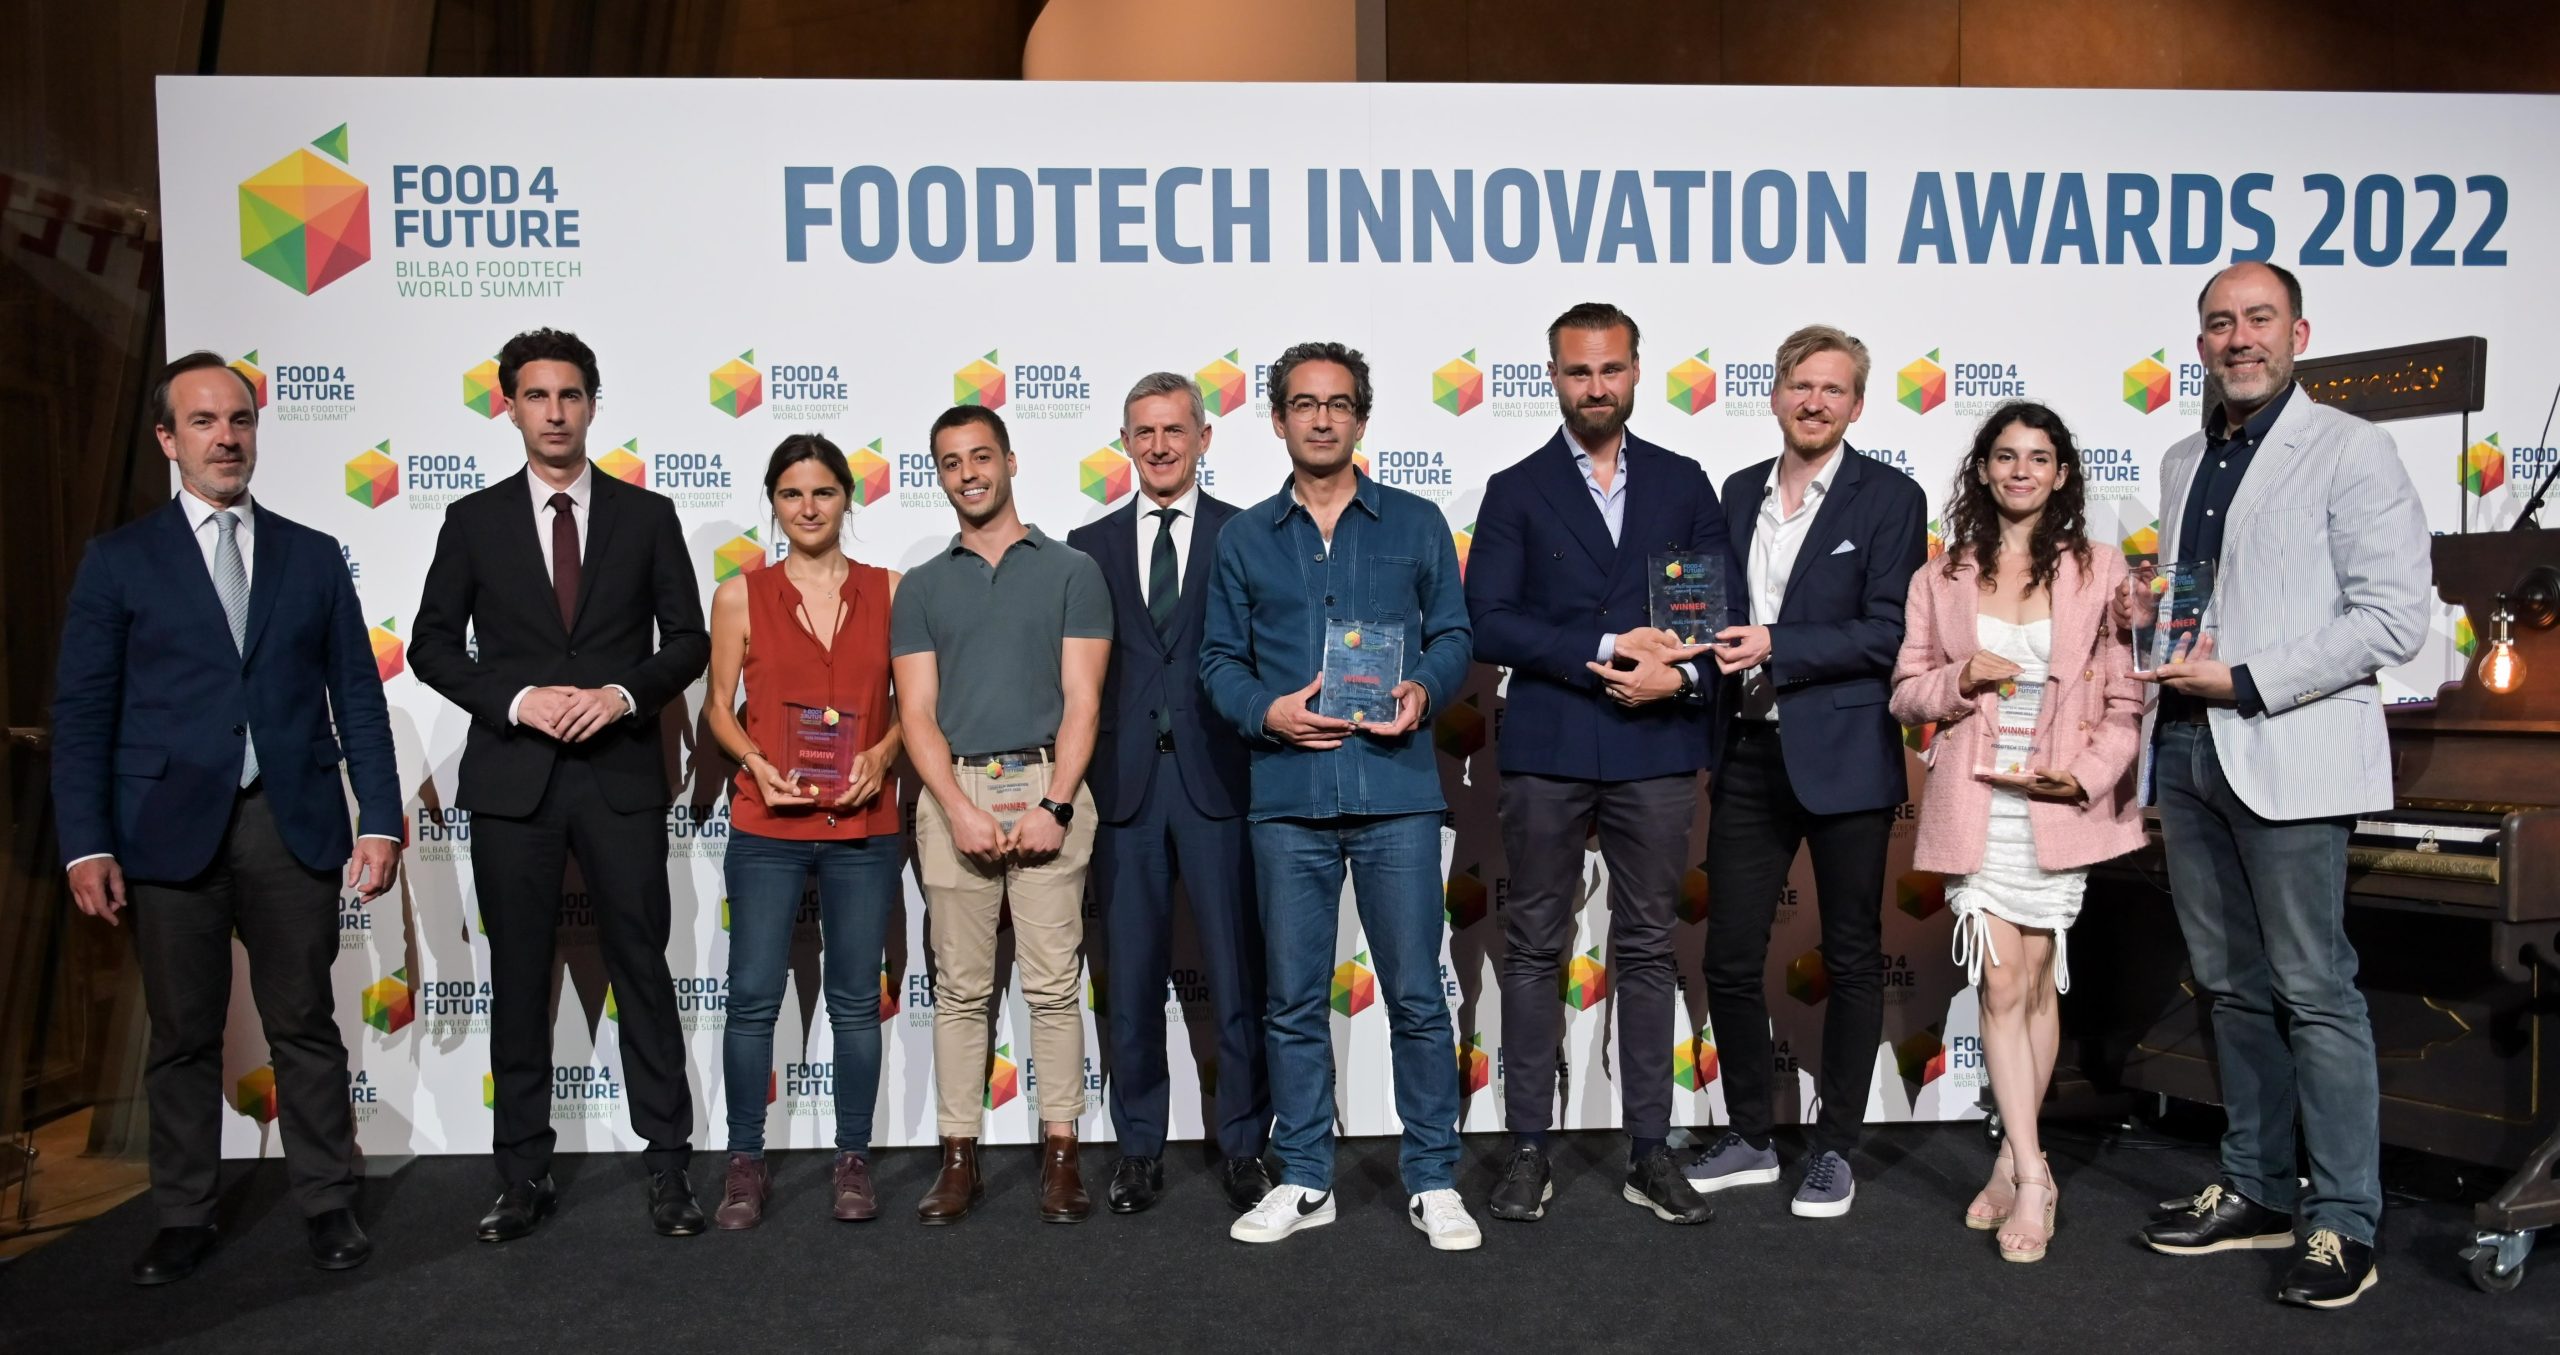 A robotic pizzeria, smart farming software and a solution to reduce single-use packaging: winners of the FoodTech Innovation Awards 2022